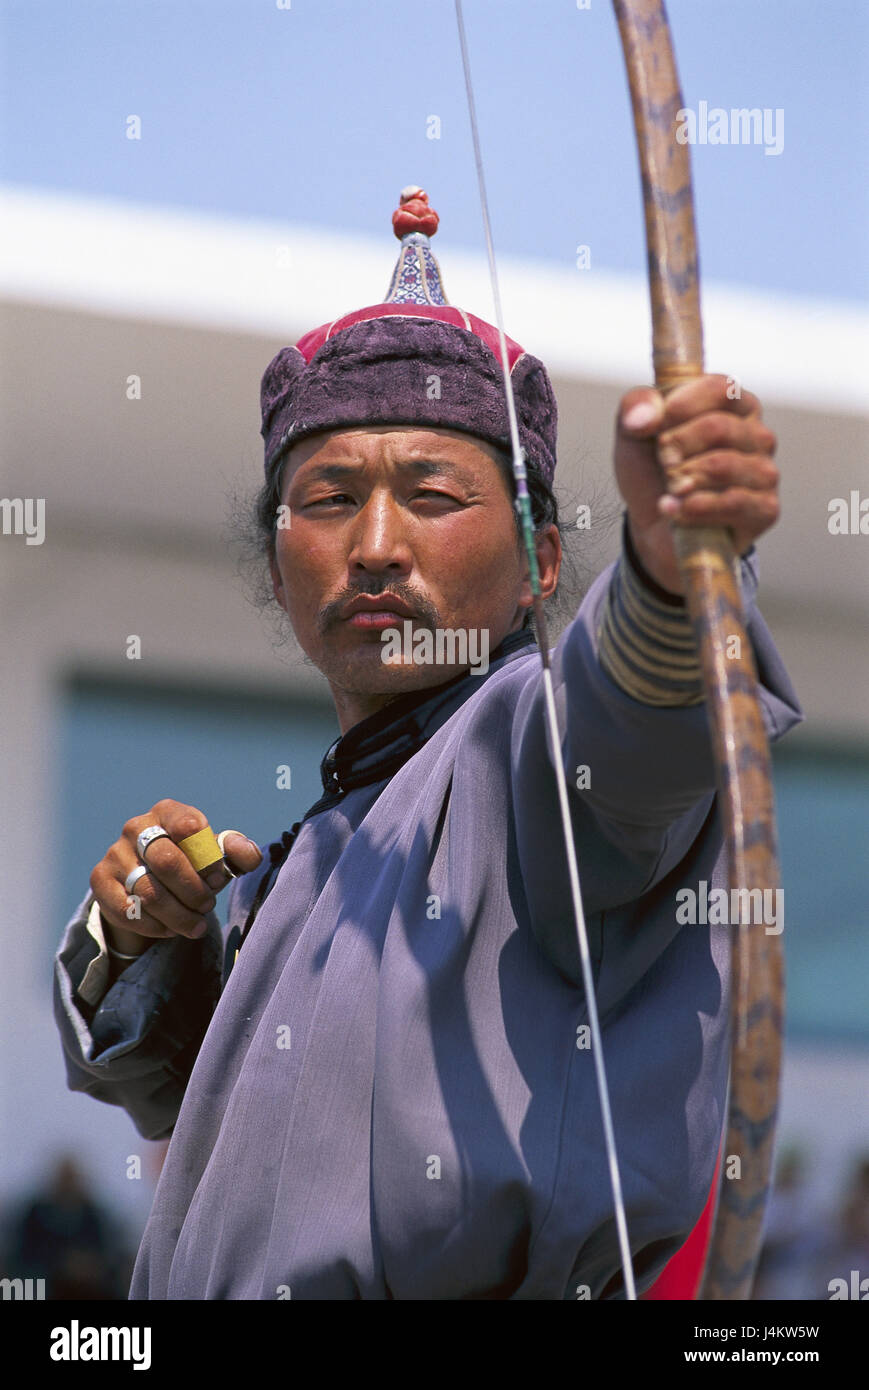 Mongolia, Ulan Bator, Naadam feast, archer, half portrait no model release Central Asia, local, Mongol, man, arrow and bow, archery, concentration, event, tradition, traditions, feast, Staatsnaadam, event, summer, conception, sport, strain, accuracy, destination security, meeting, shoot, outside Stock Photo